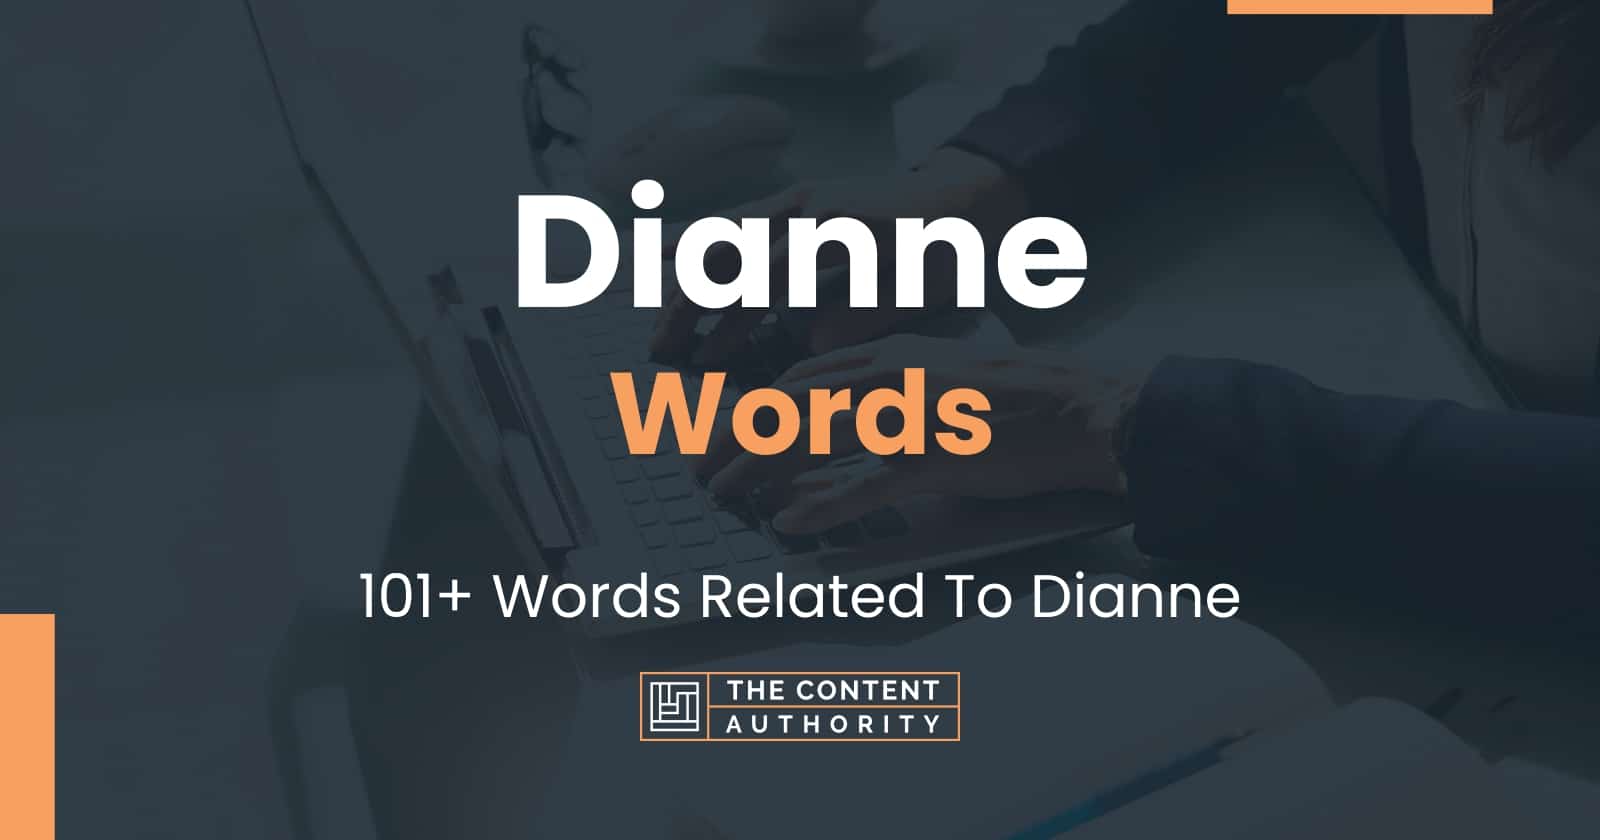 Dianne Words - 101+ Words Related To Dianne